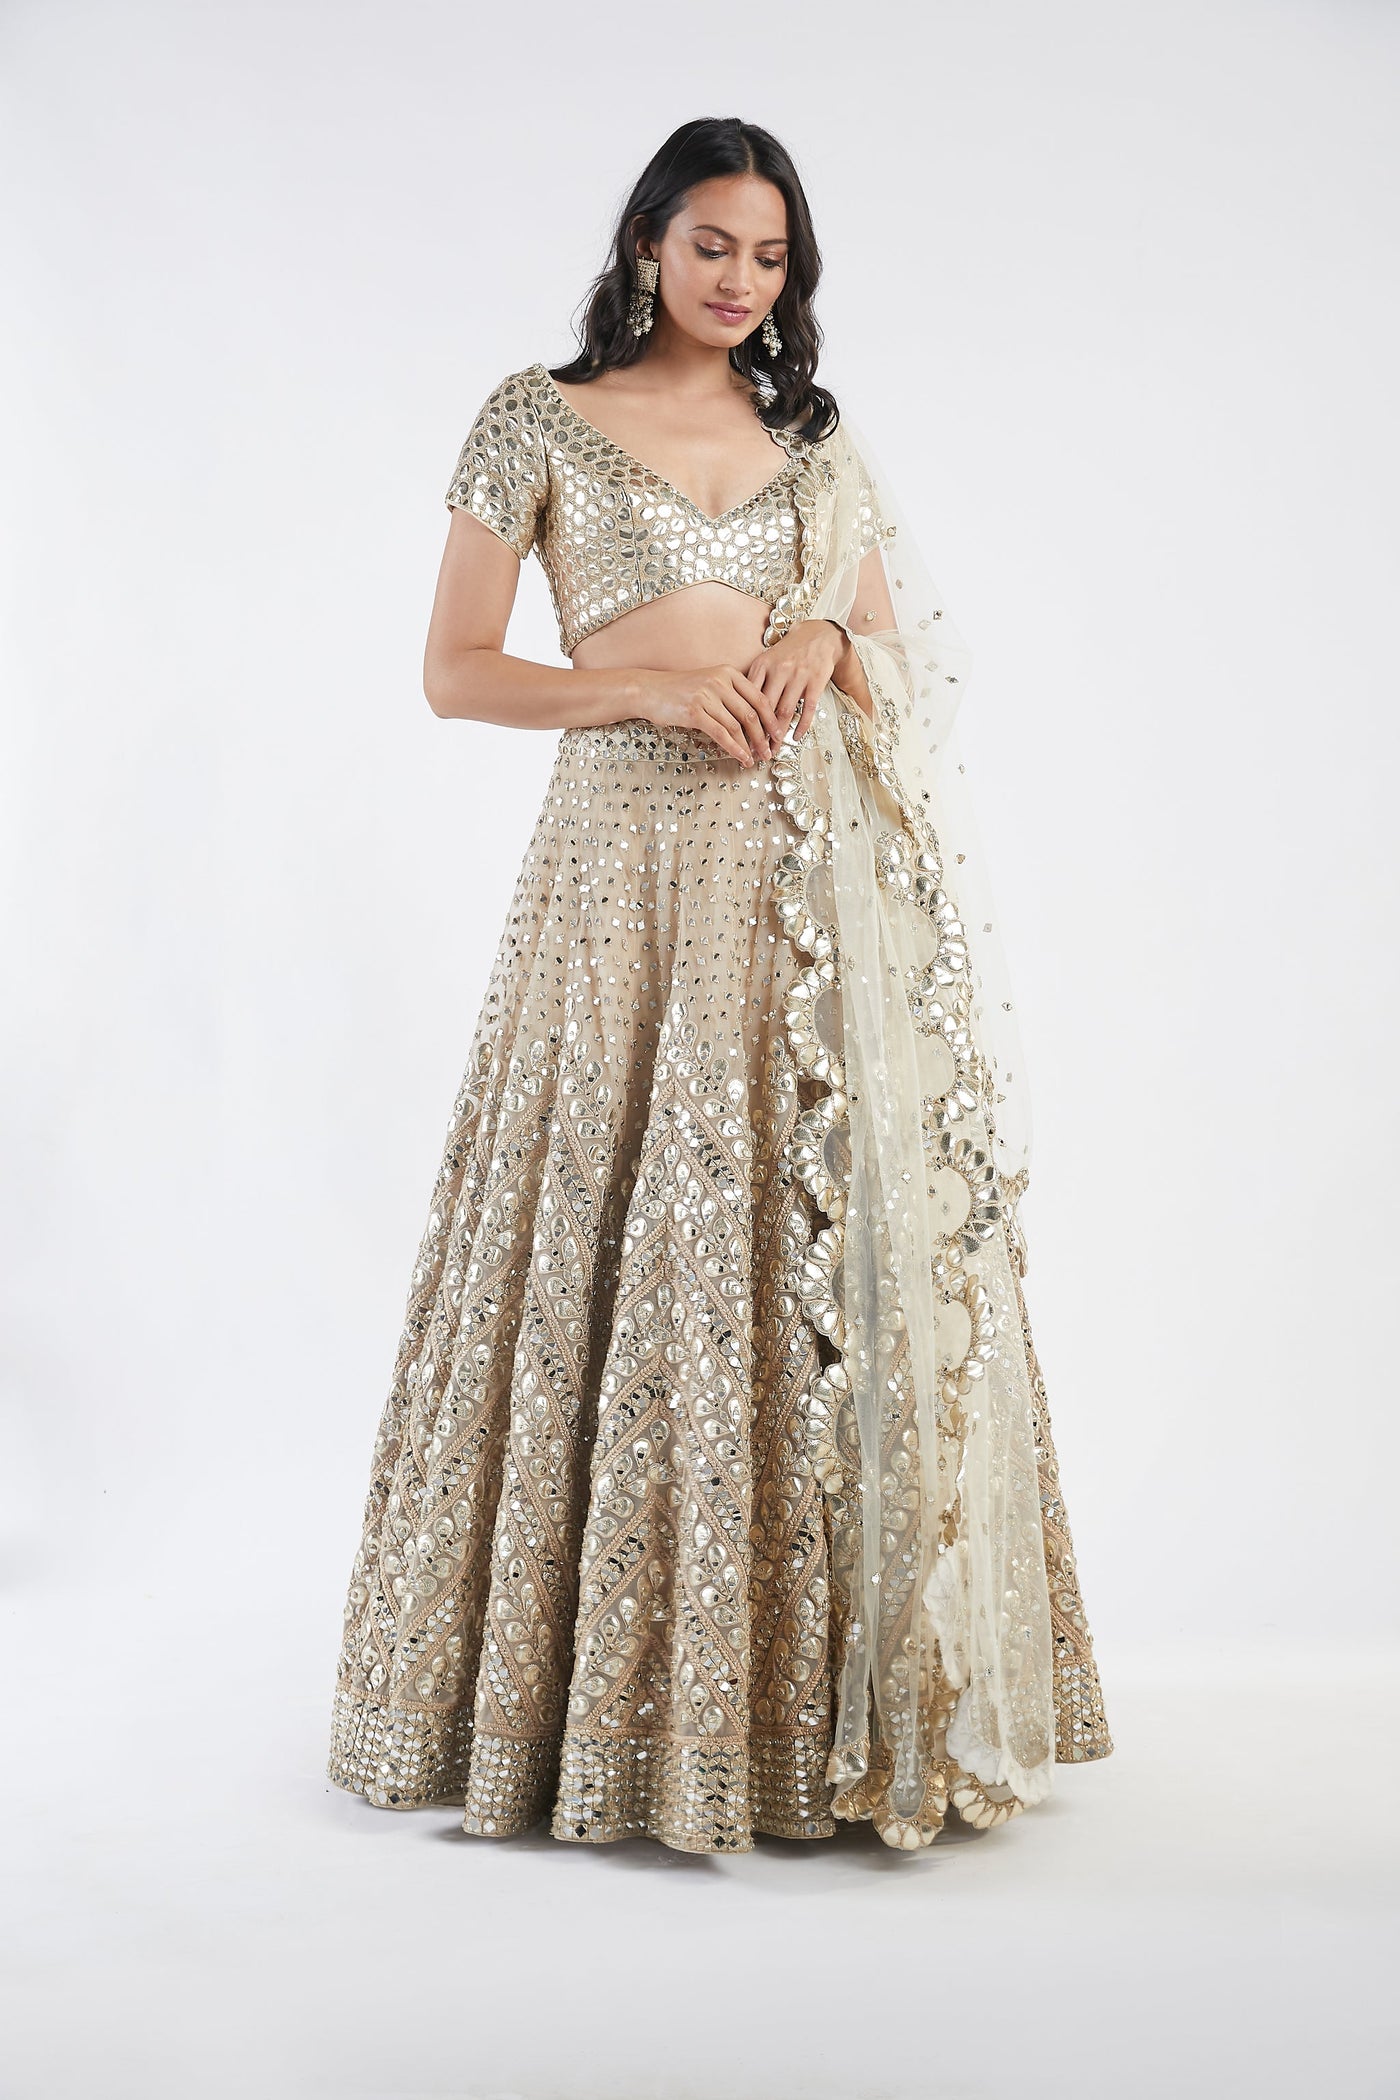 Beige Embellished Lehenga Set - Indian Clothing in Denver, CO, Aurora, CO, Boulder, CO, Fort Collins, CO, Colorado Springs, CO, Parker, CO, Highlands Ranch, CO, Cherry Creek, CO, Centennial, CO, and Longmont, CO. Nationwide shipping USA - India Fashion X